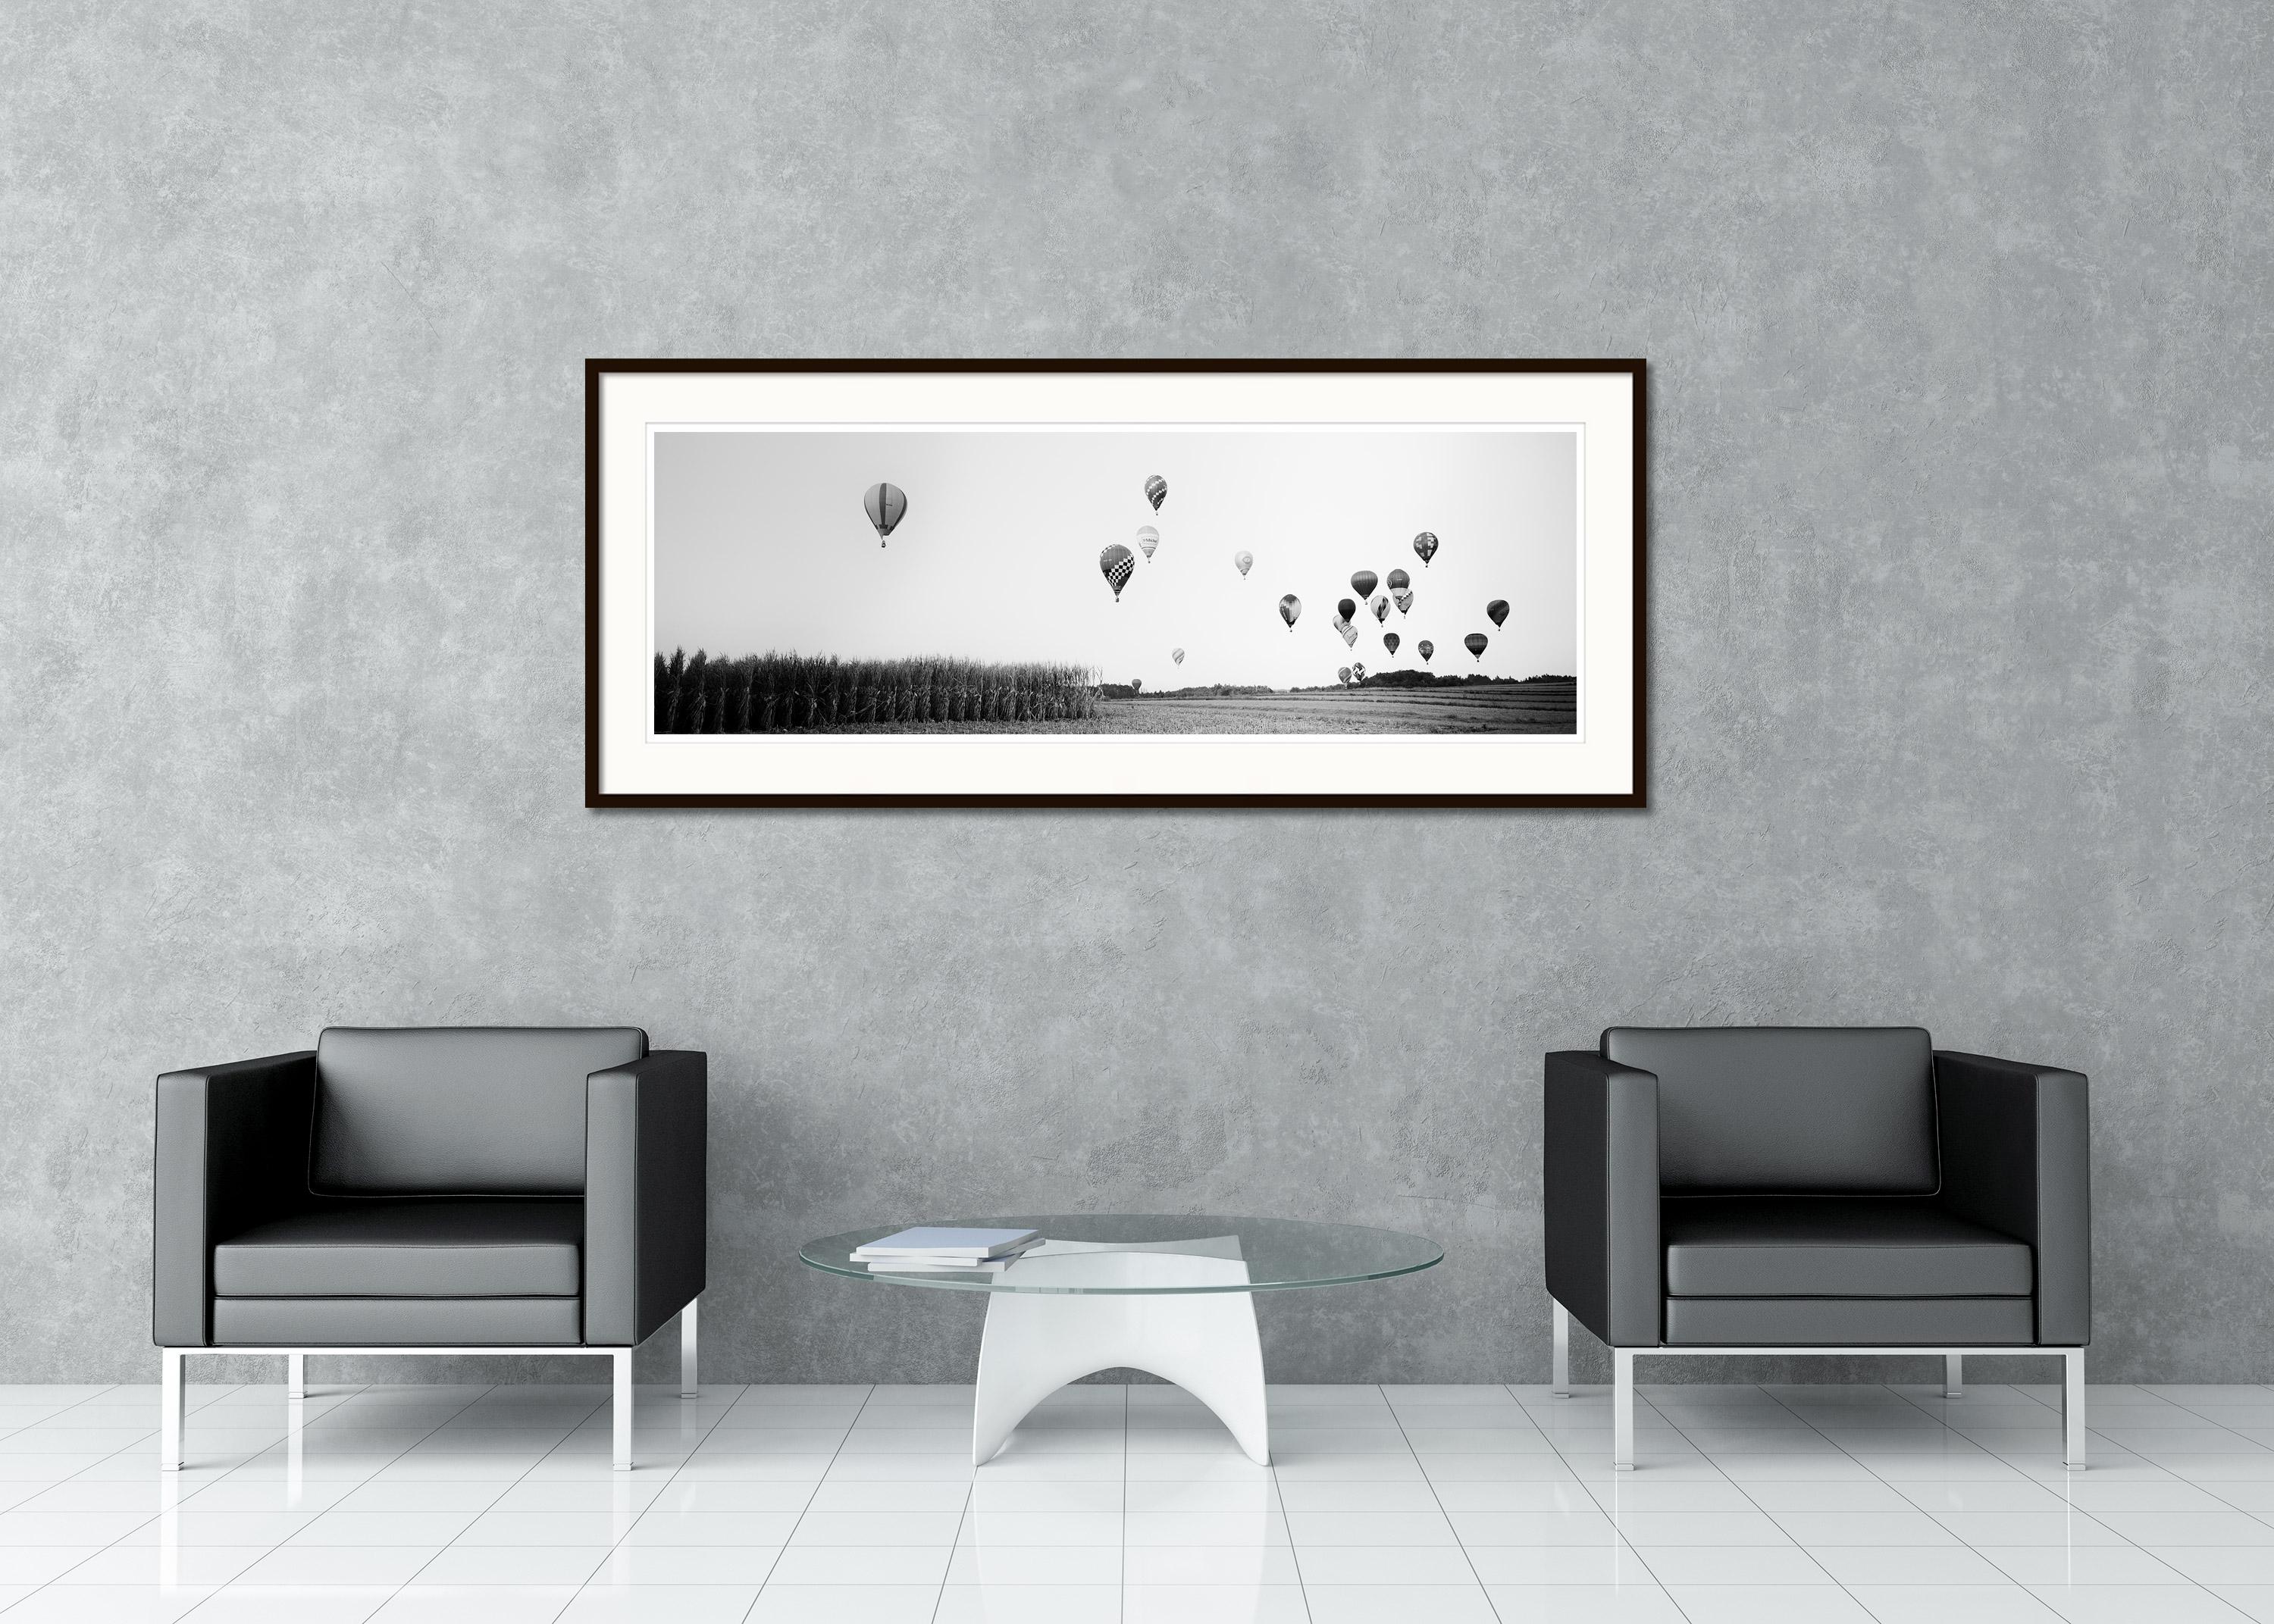 Black and White Fine Art panorama photography - Hot Air Balloon Panorama, Championship, Waldviertel, Austria. Archival pigment ink print, edition of 9. Signed, titled, dated and numbered by artist. Certificate of authenticity included. Printed with